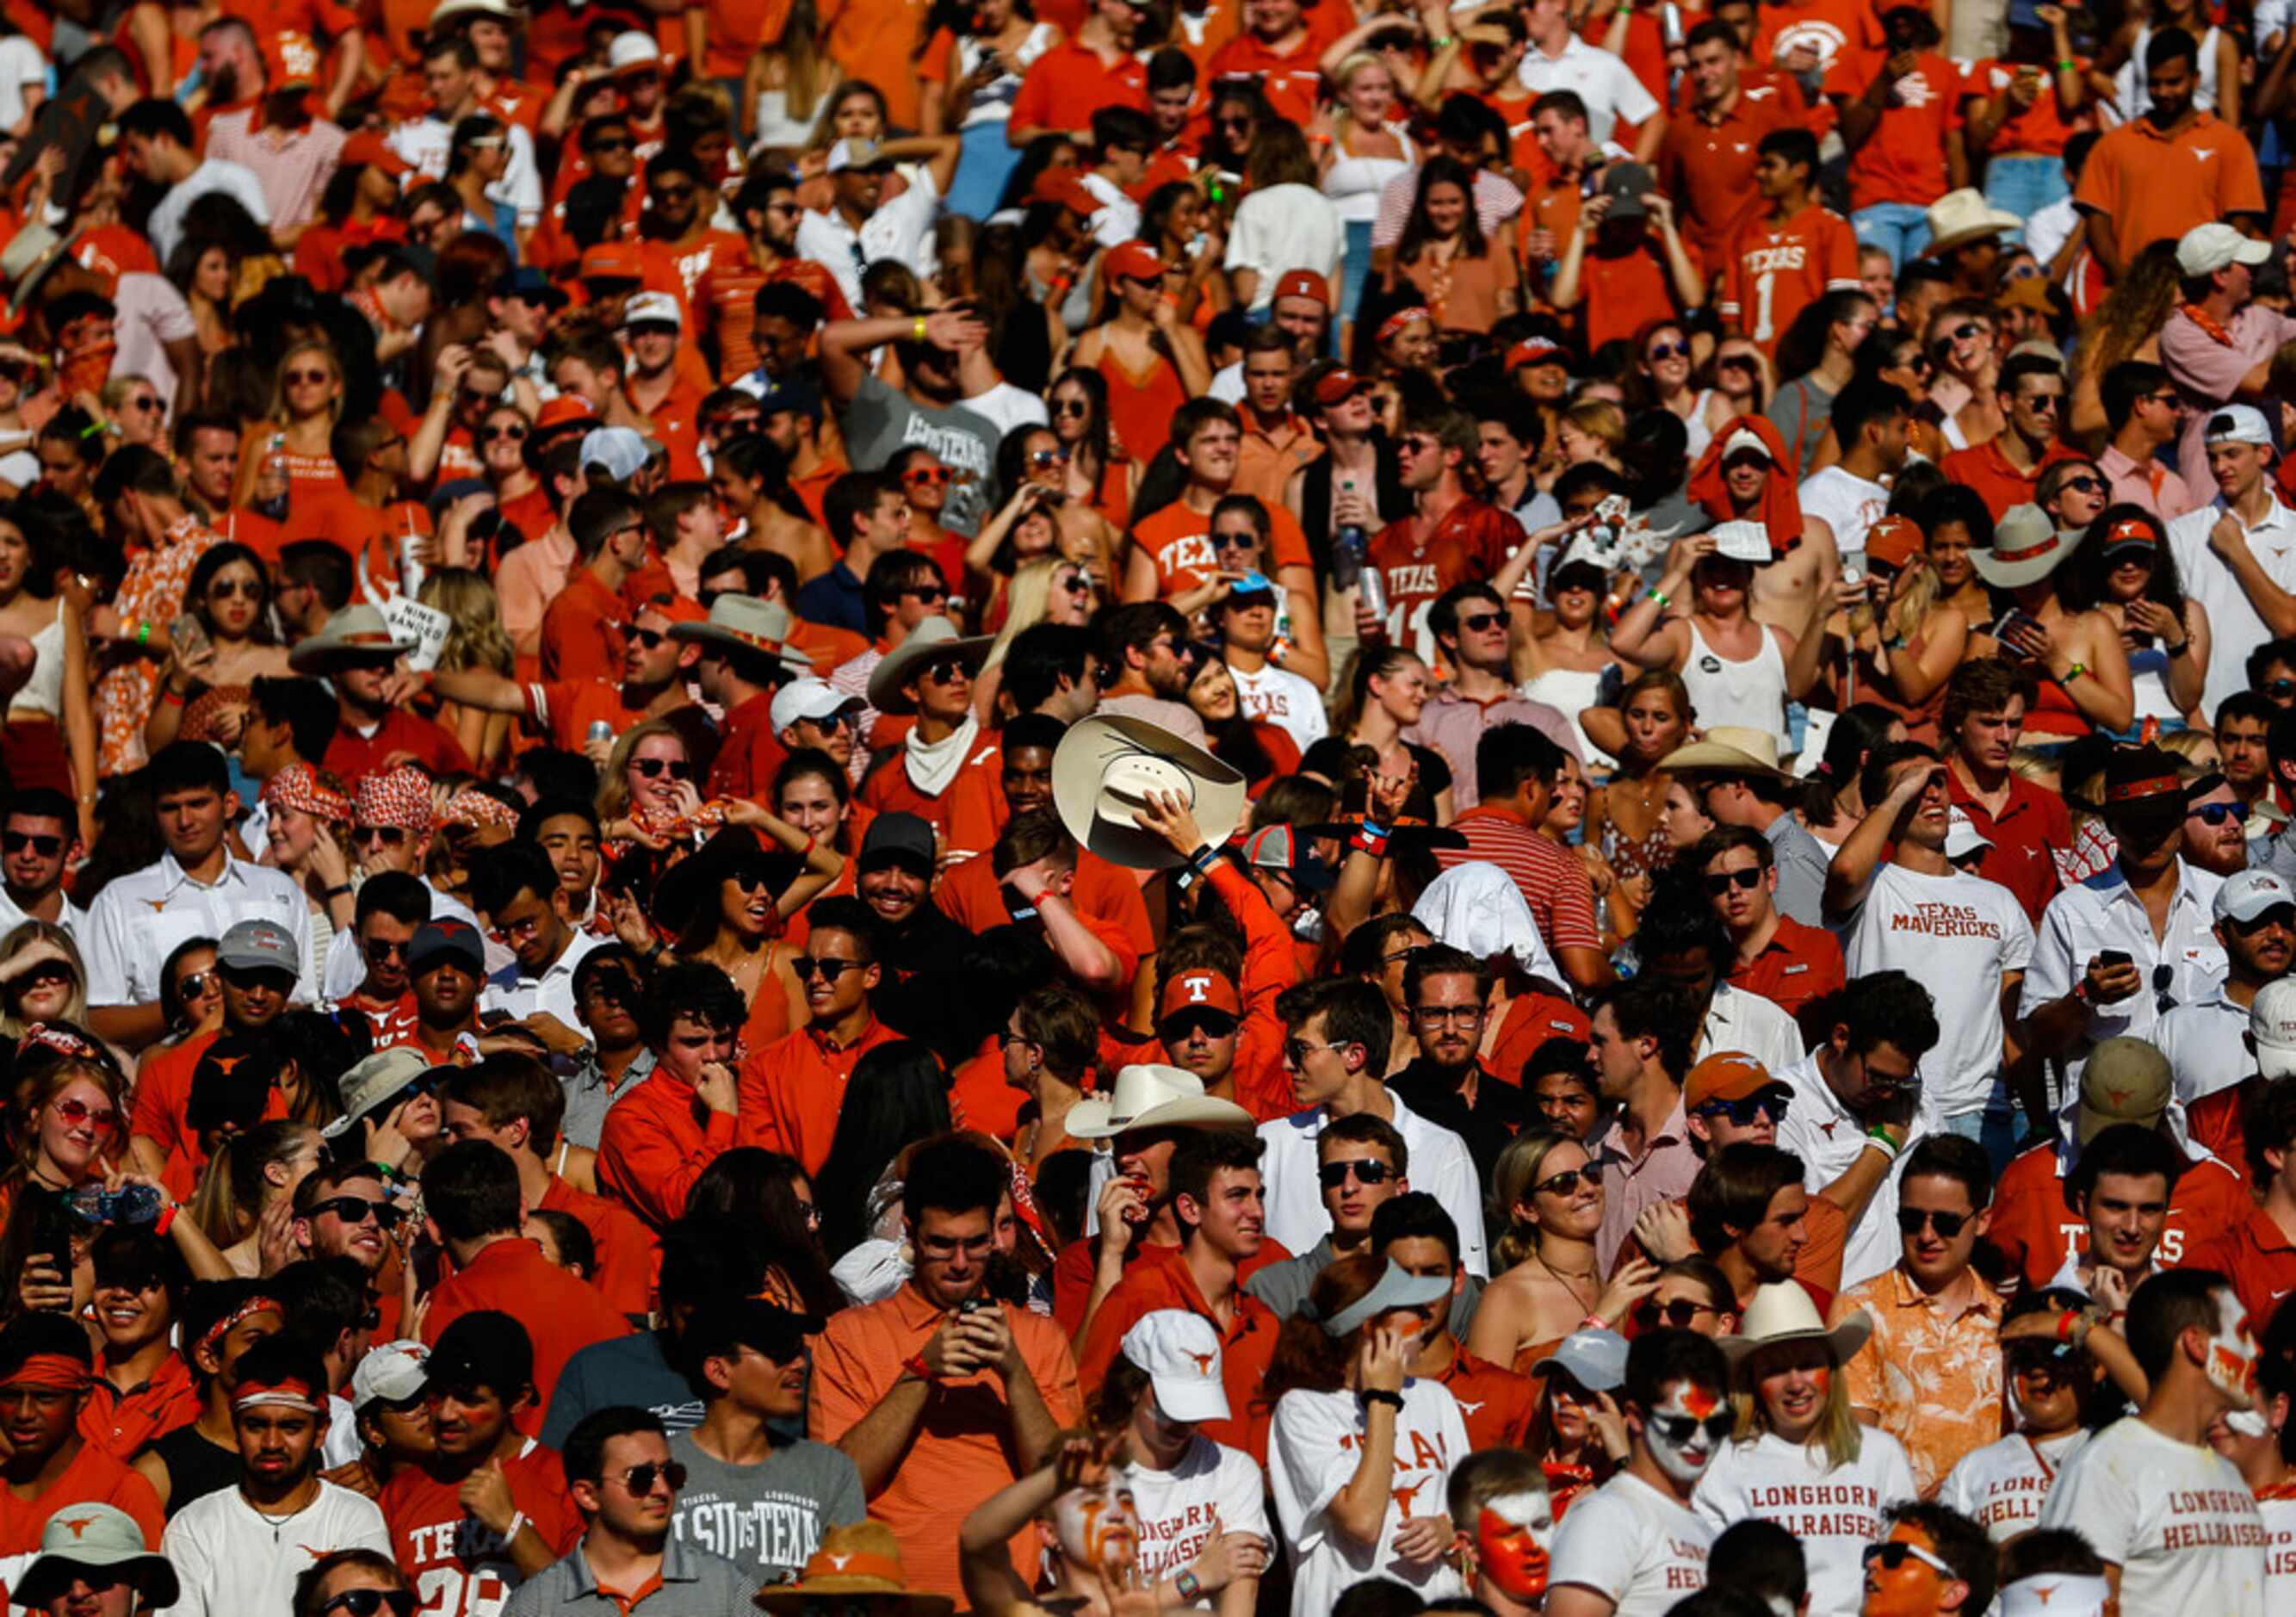 Texas Longhorns fans fill the stands prior to a college football game between the University...